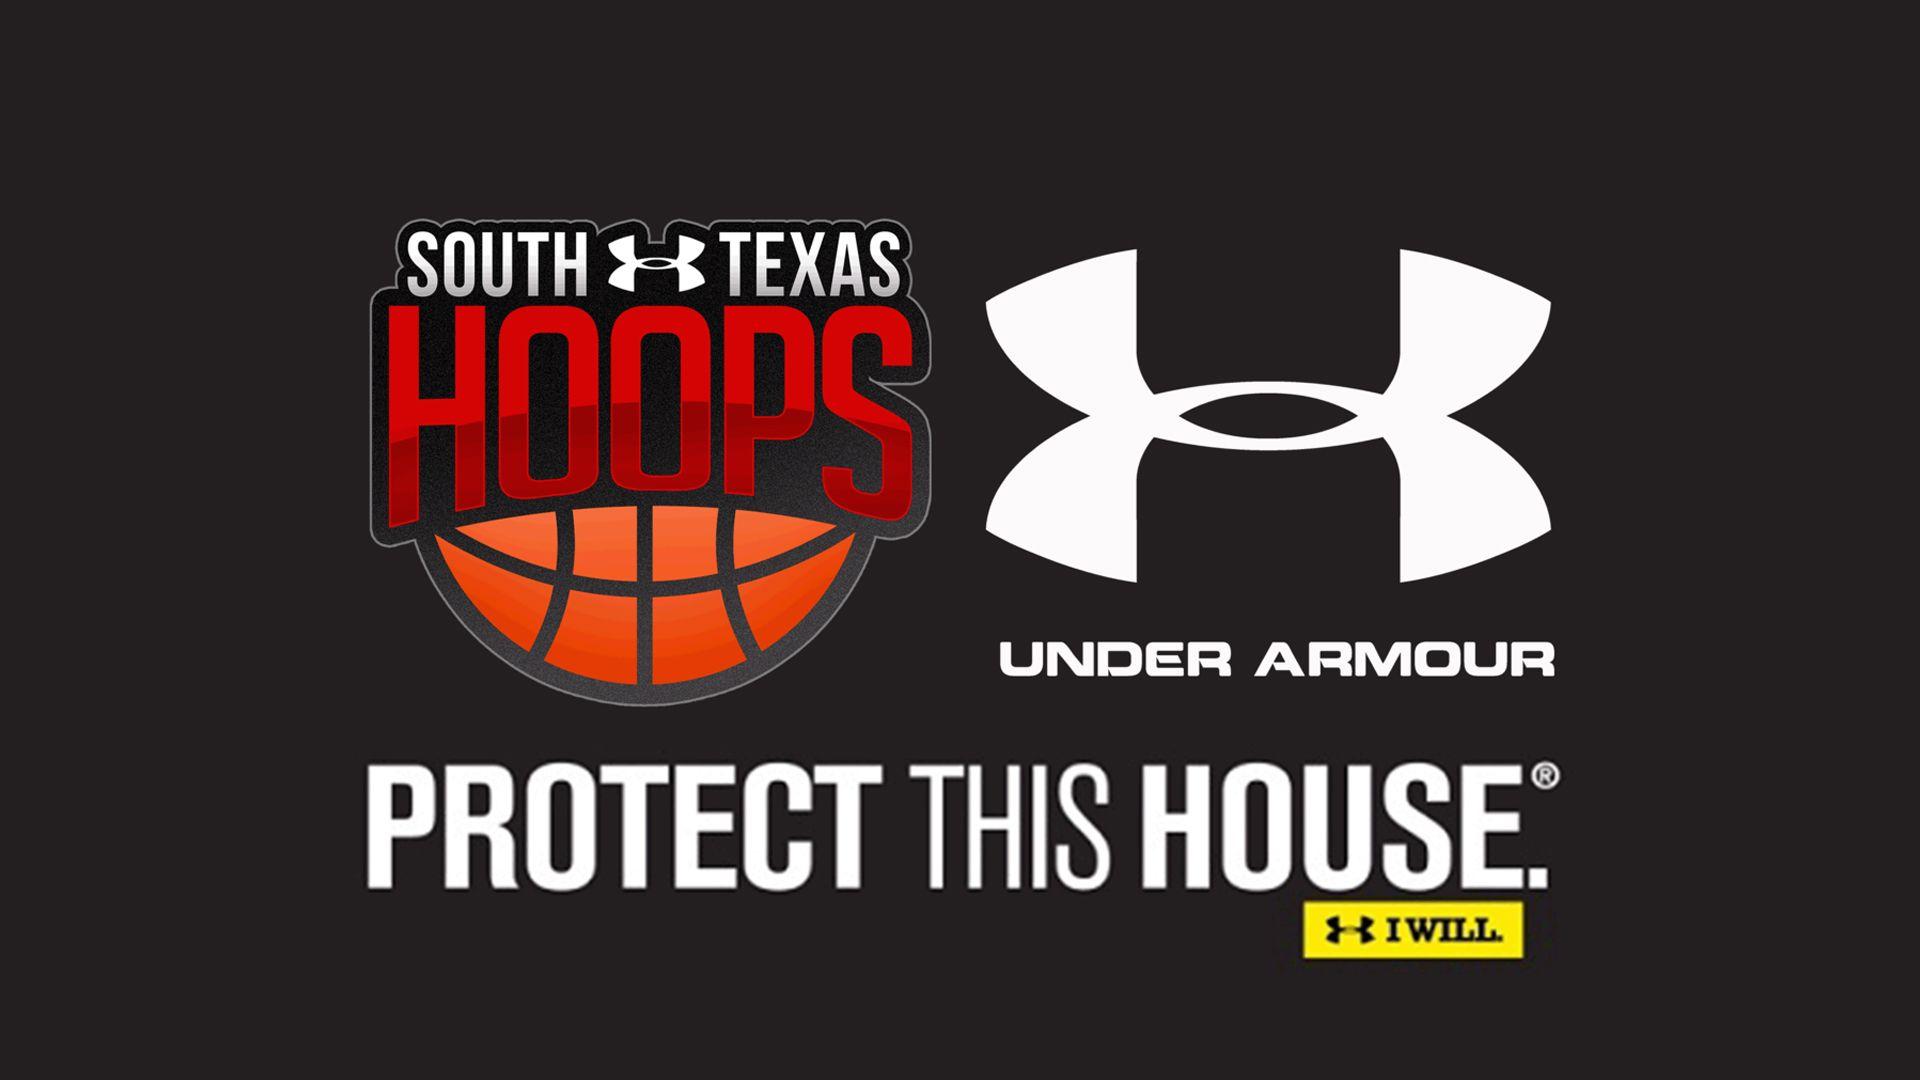 Cool Under Armour Wallpaper 17 of 40 with South Texas Hoops